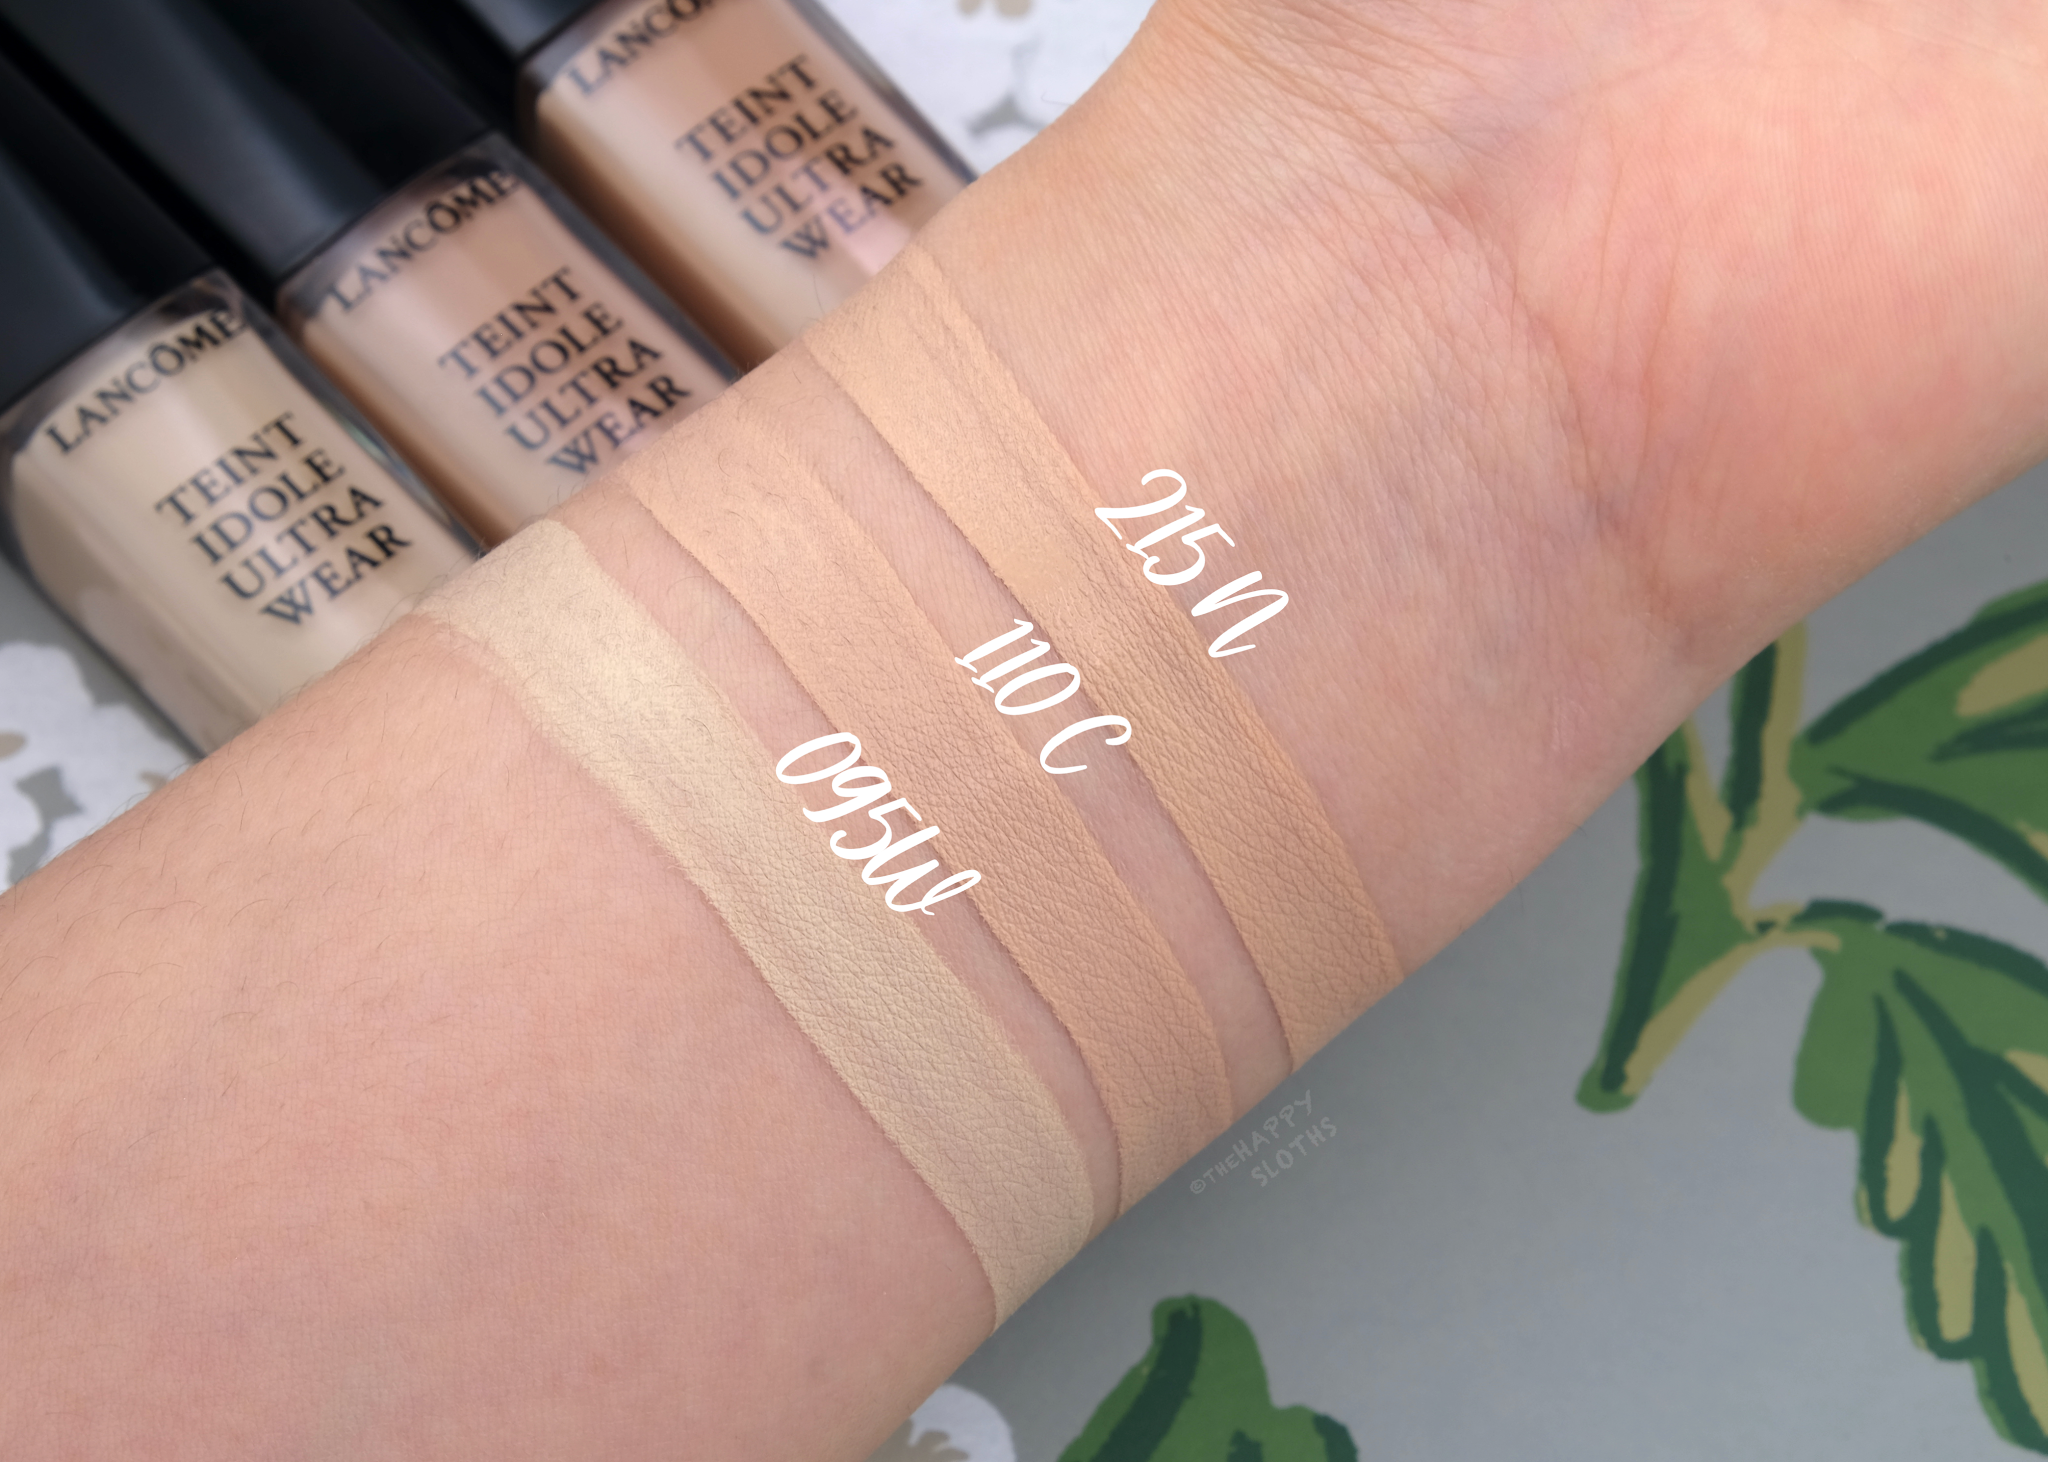 Lancôme | Teint Idole Ultra Wear All Over Concealer in "215", "110" & "095": Review and Swatches